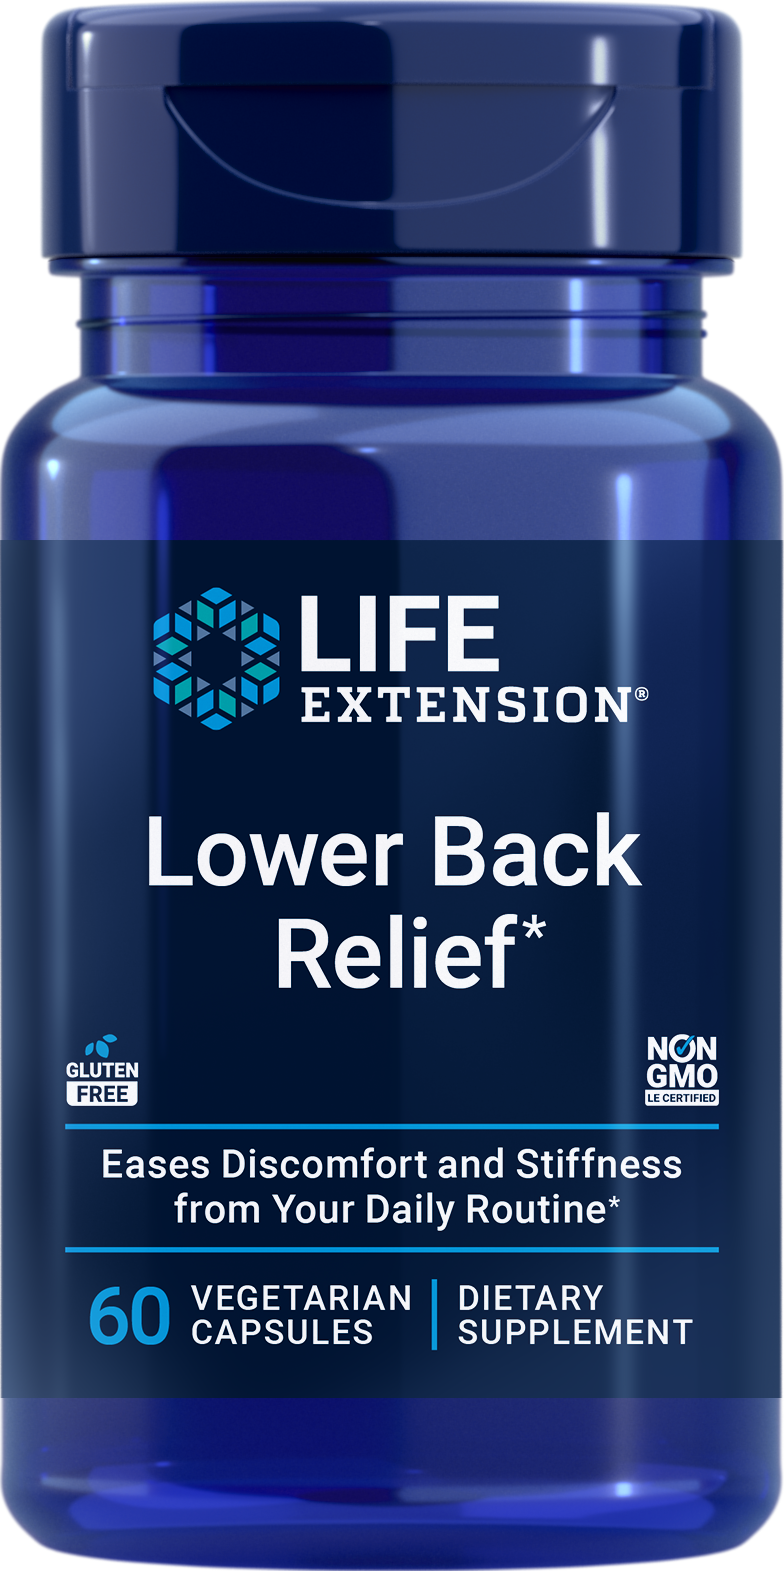 Don’t let discomfort hold you back! When taken regularly, Life Extension’s Lower Back Relief formula helps relieve lower back discomfort and occasional lower back stiffness and encourages healthy flexibility and overall quality of life.